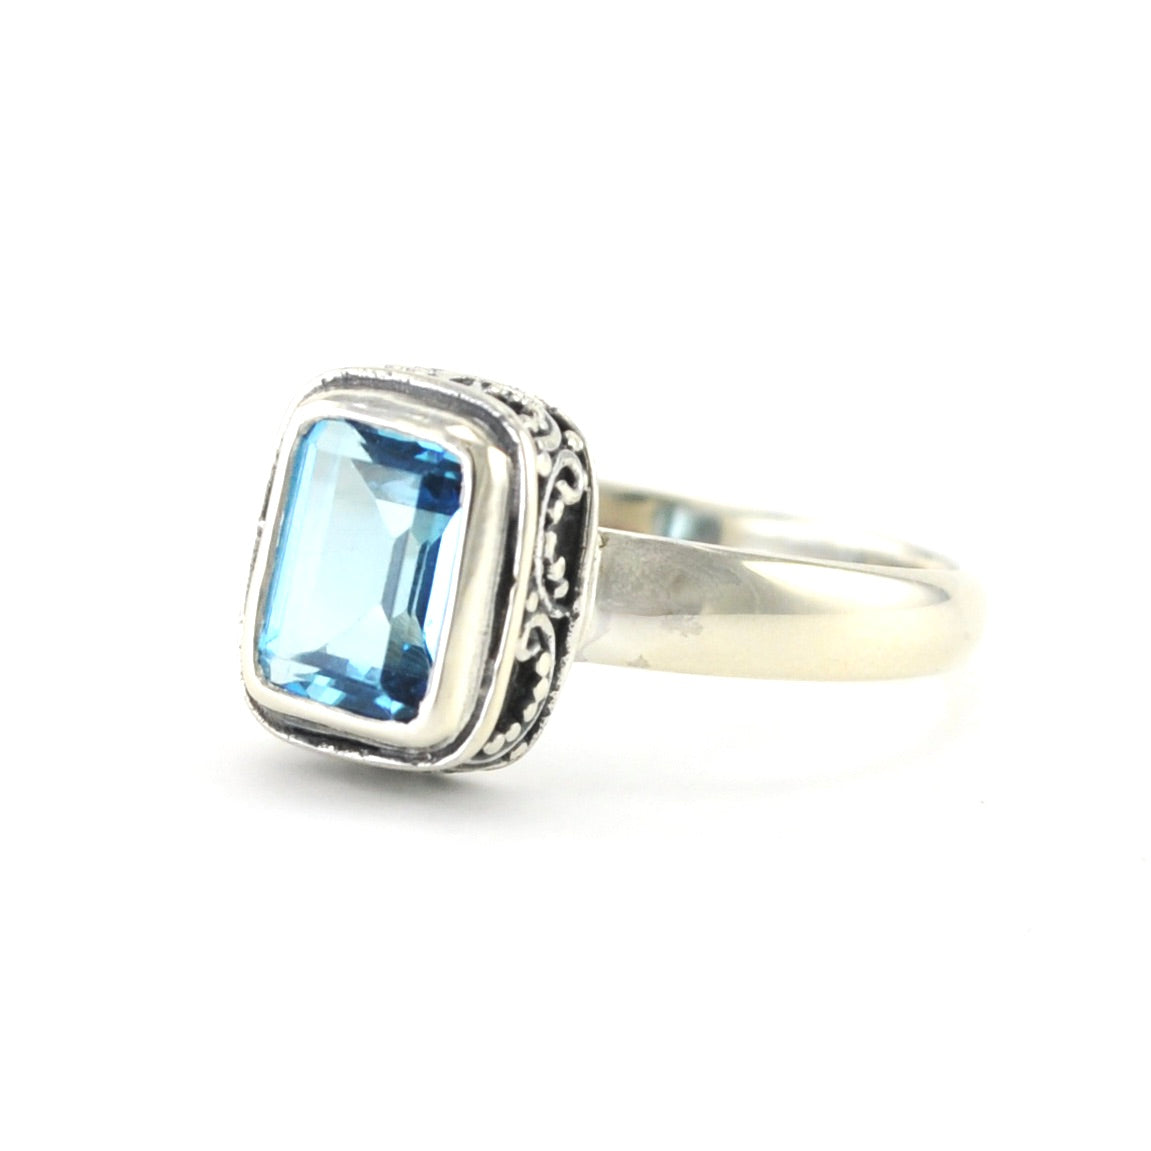 Sterling Silver Blue Topaz 6x8mm Rectangle Bali Ring